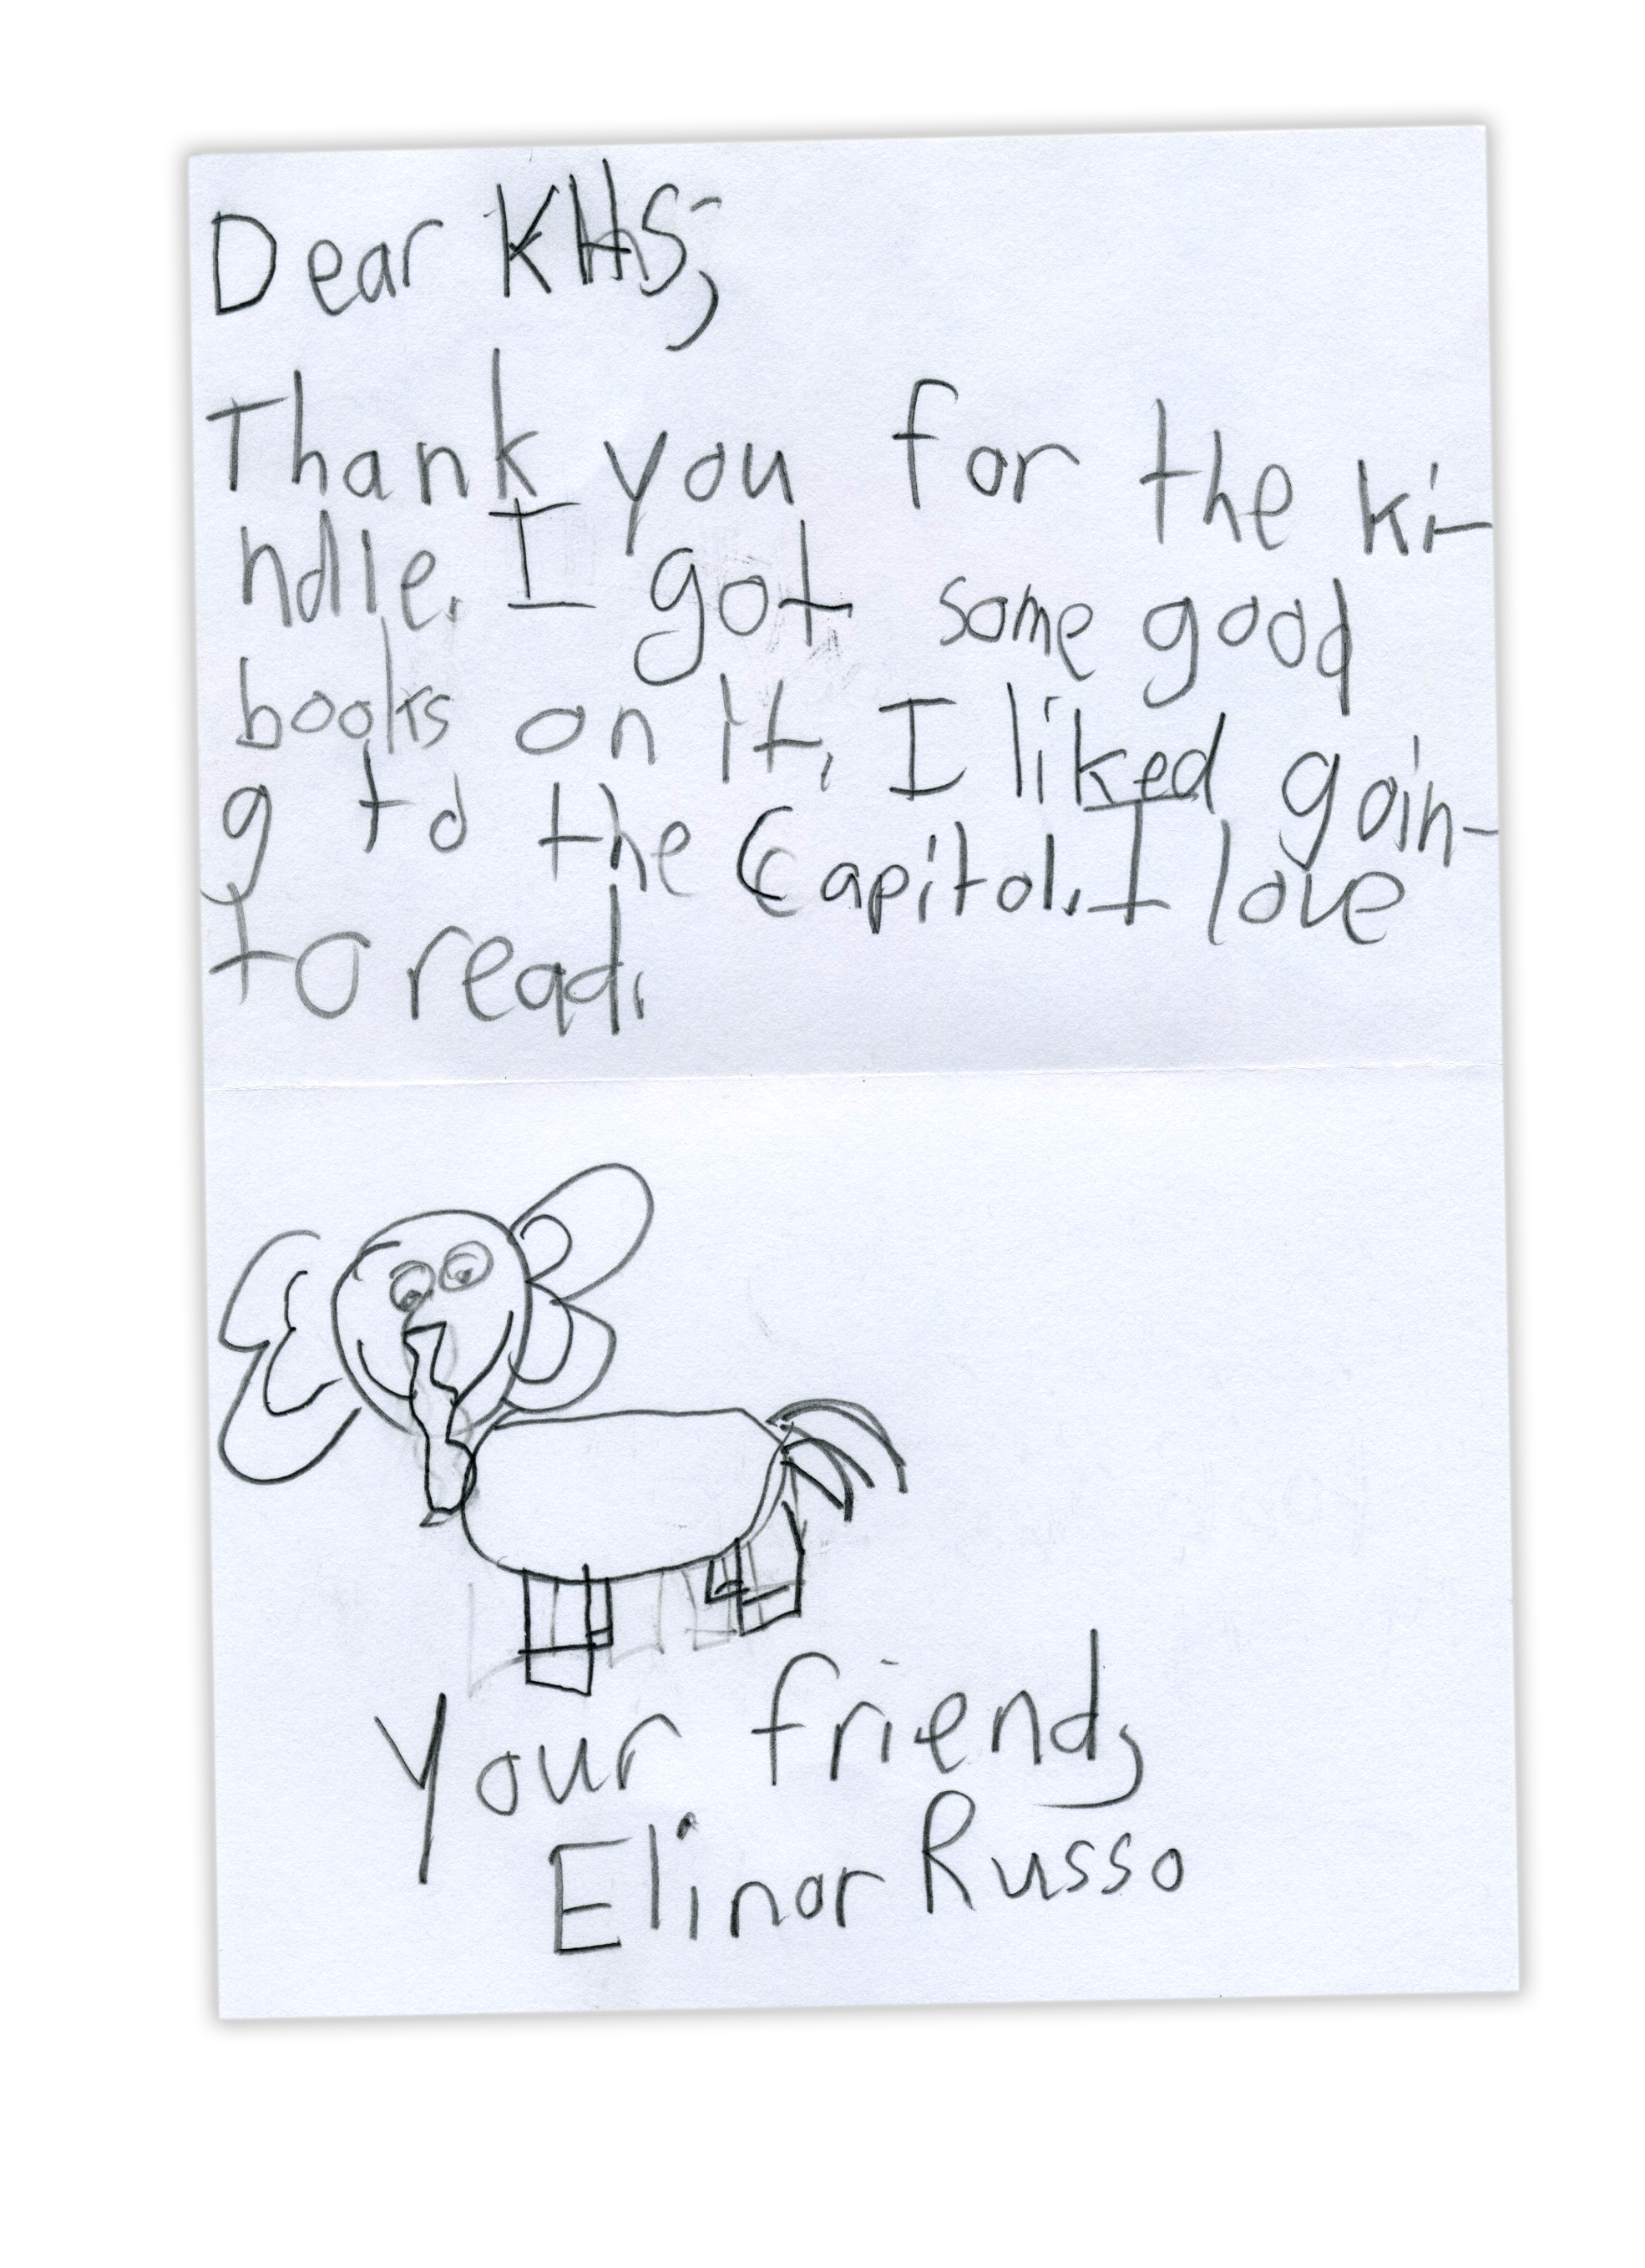 Thank You Note From Elinor Russo 